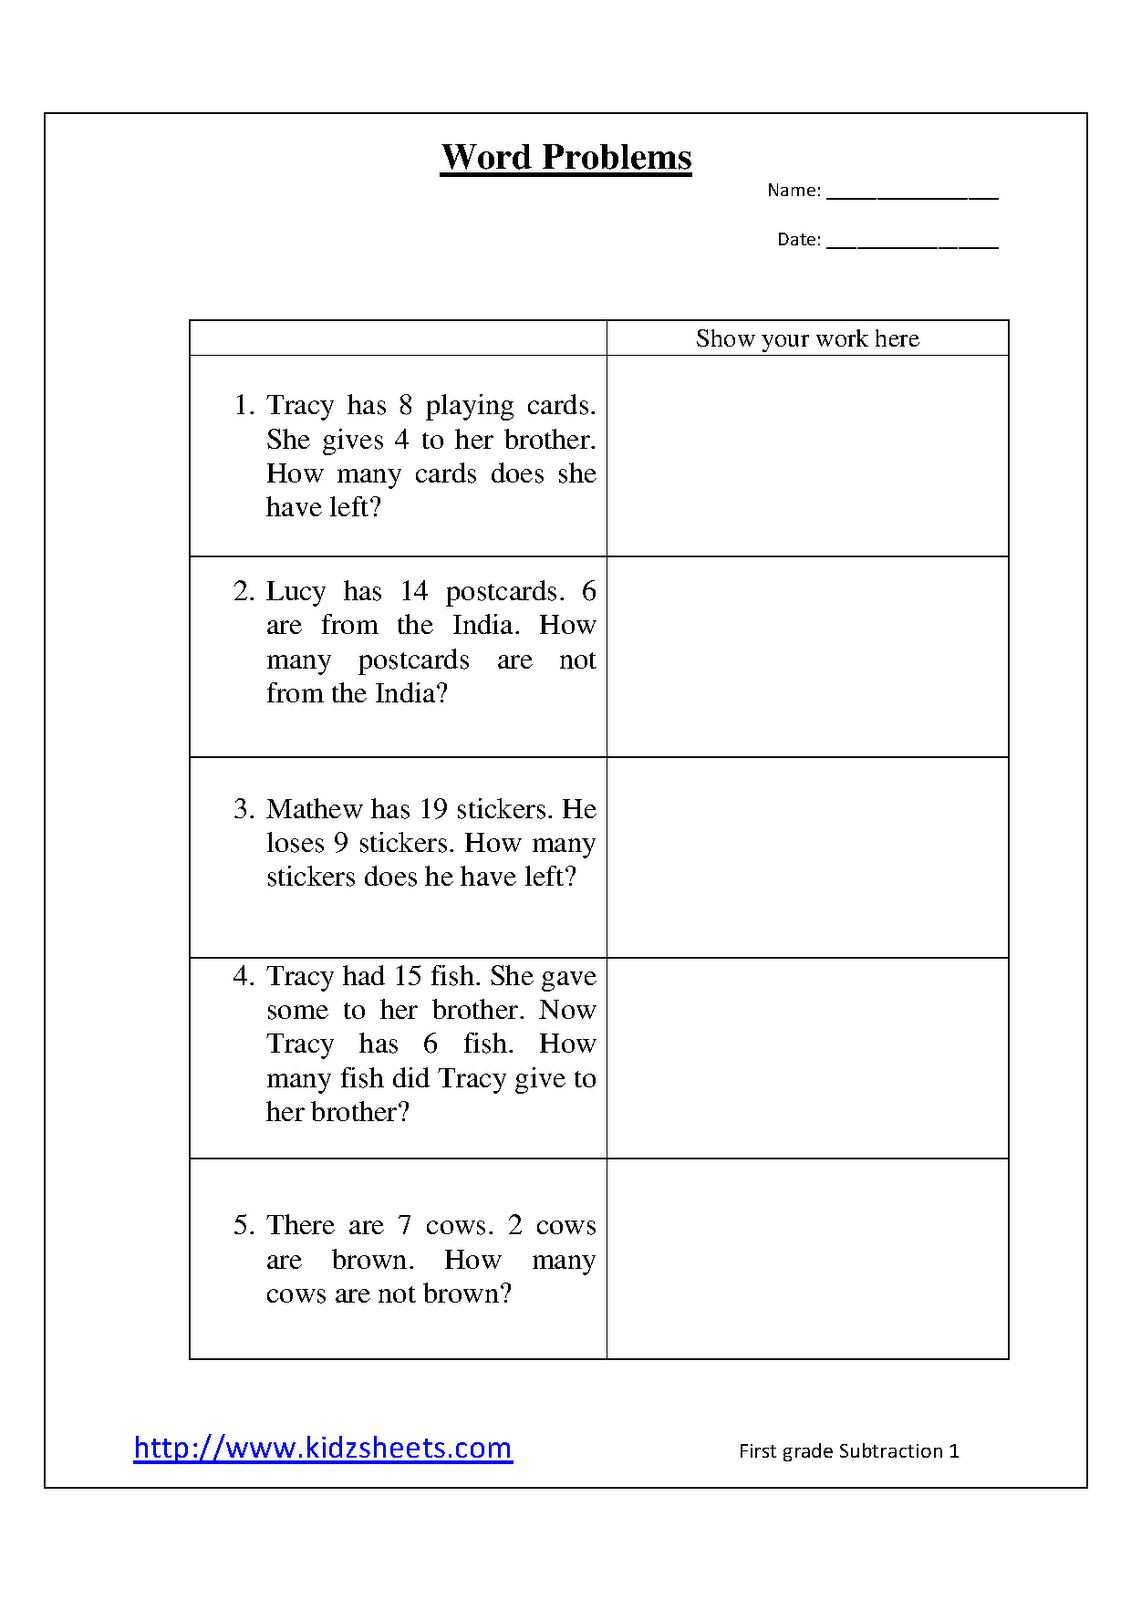 12 Best Images of 1st Grade Subtraction Word Problems ...